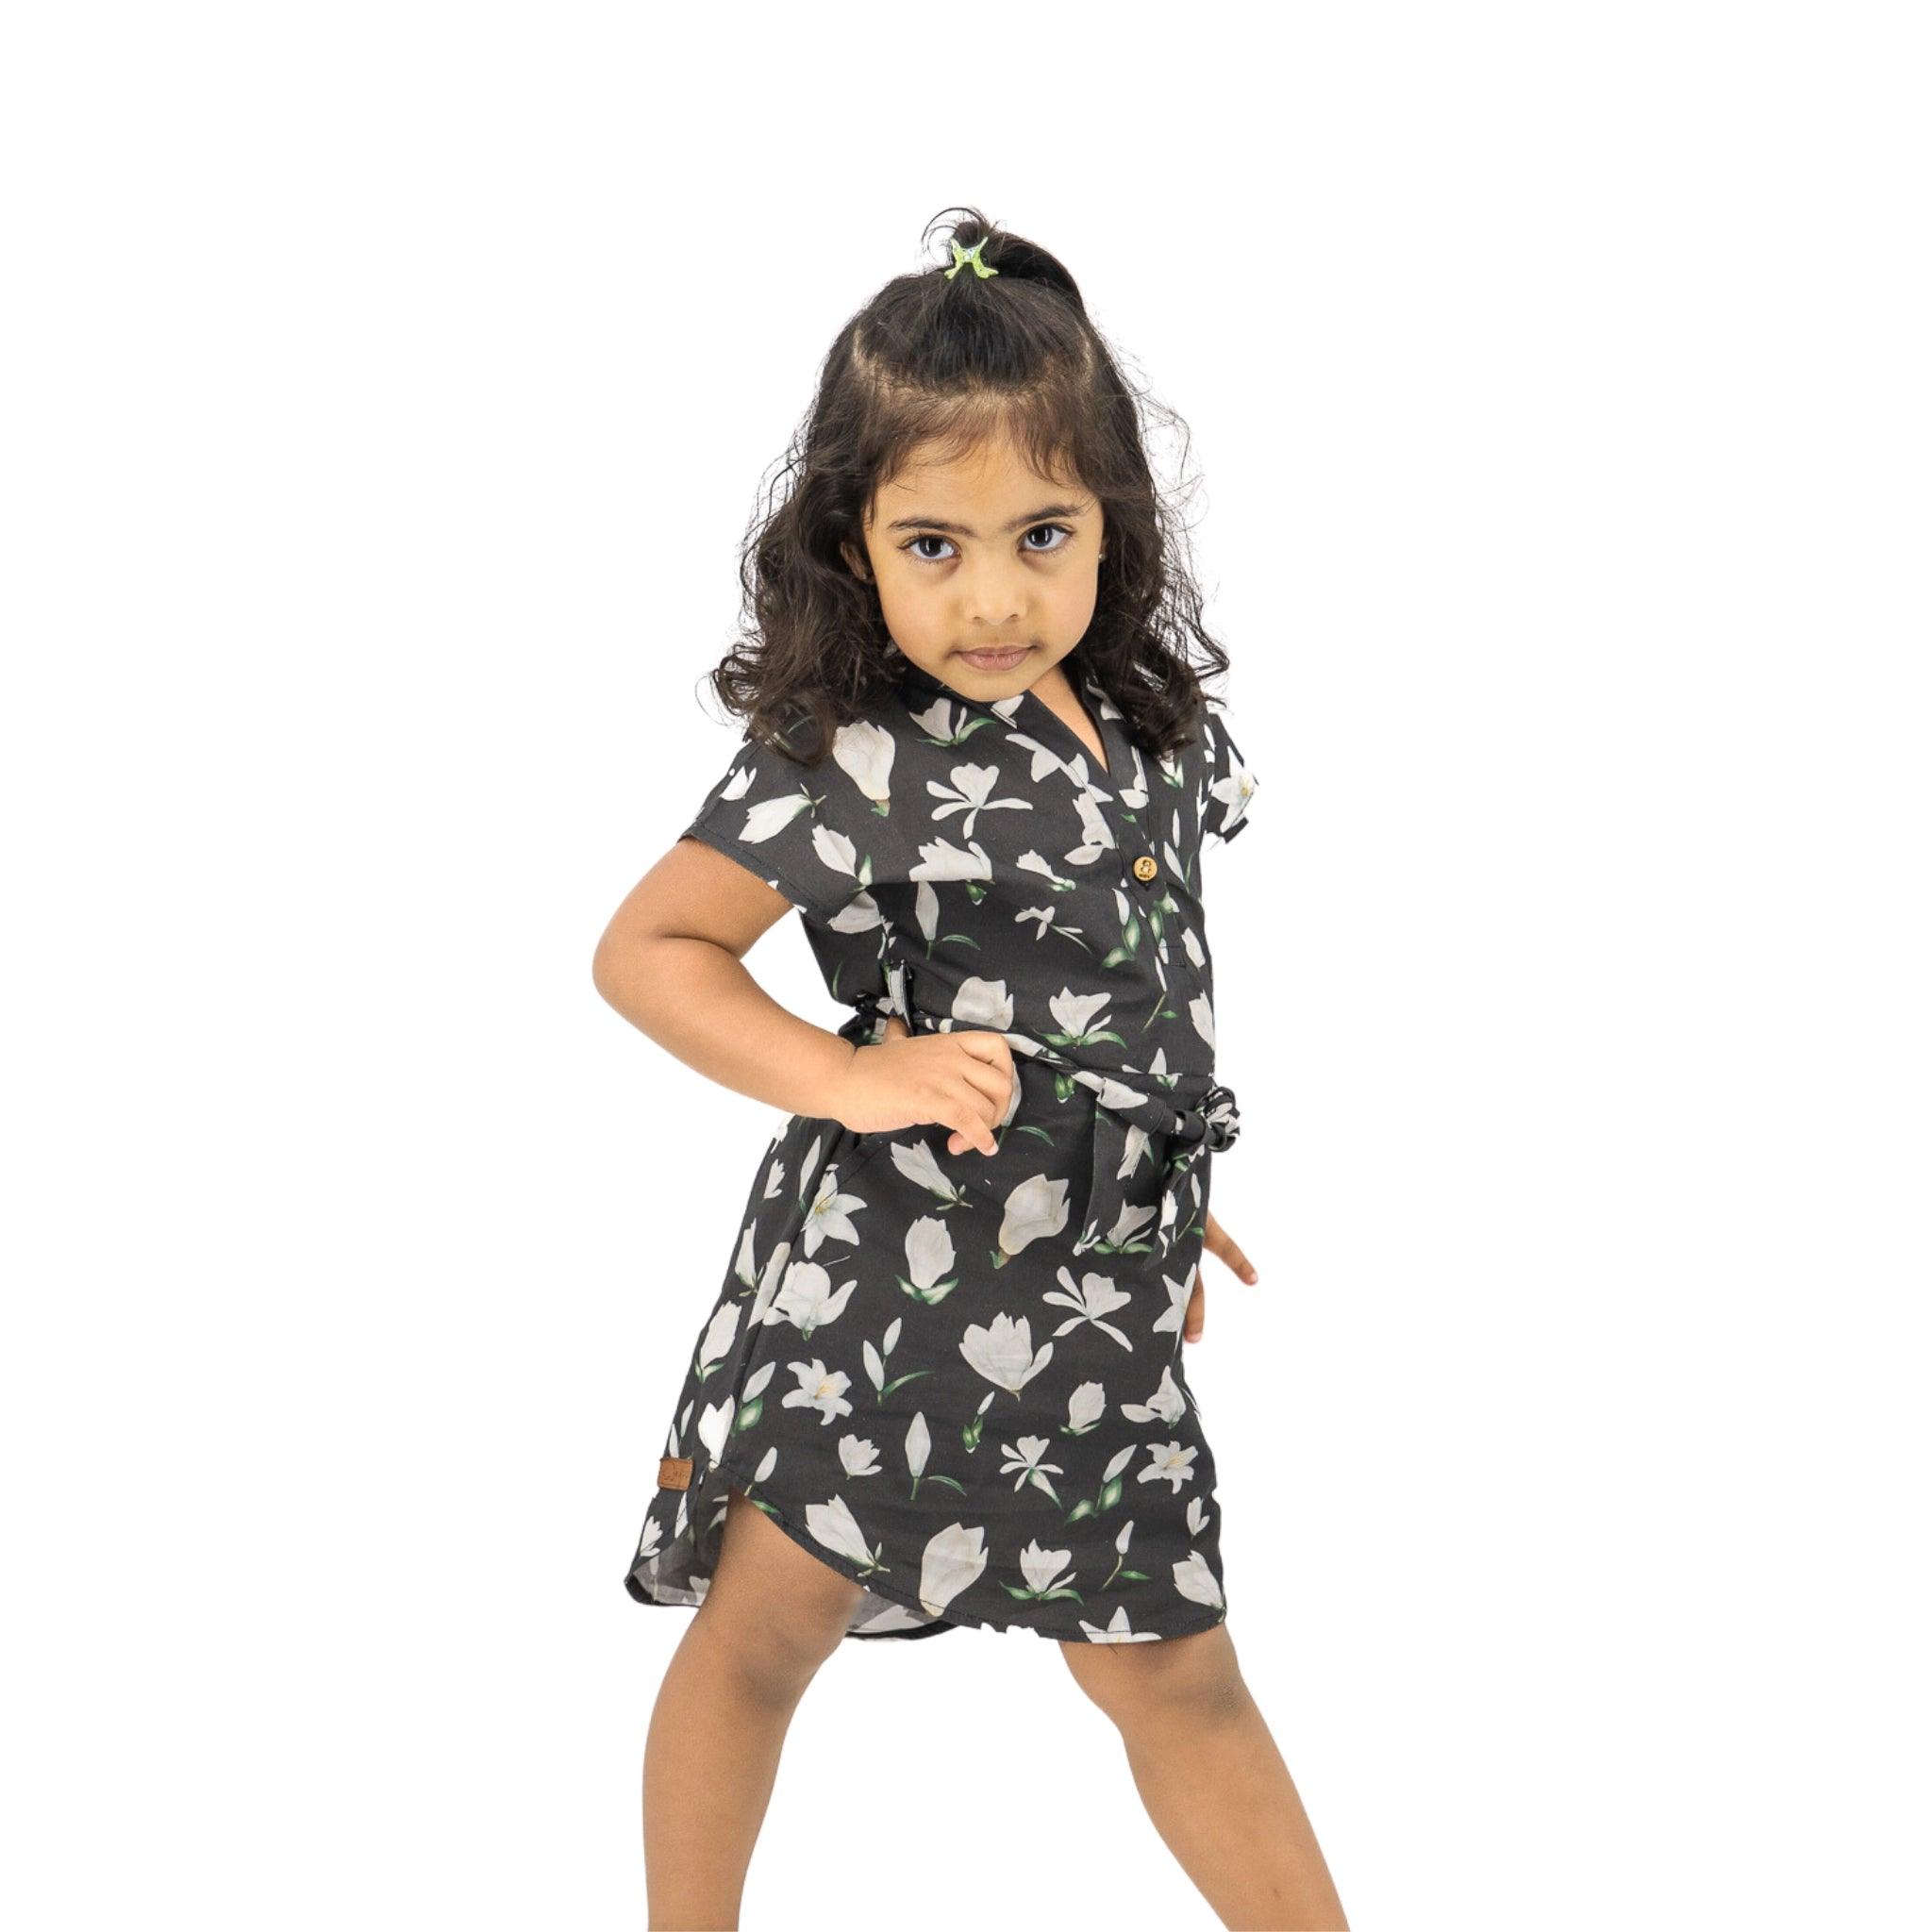 A young girl in a Karee Black Lilly Blossom Cotton Shirt Dress stands with one hand on her hip, looking intently at the camera, isolated on a white background.